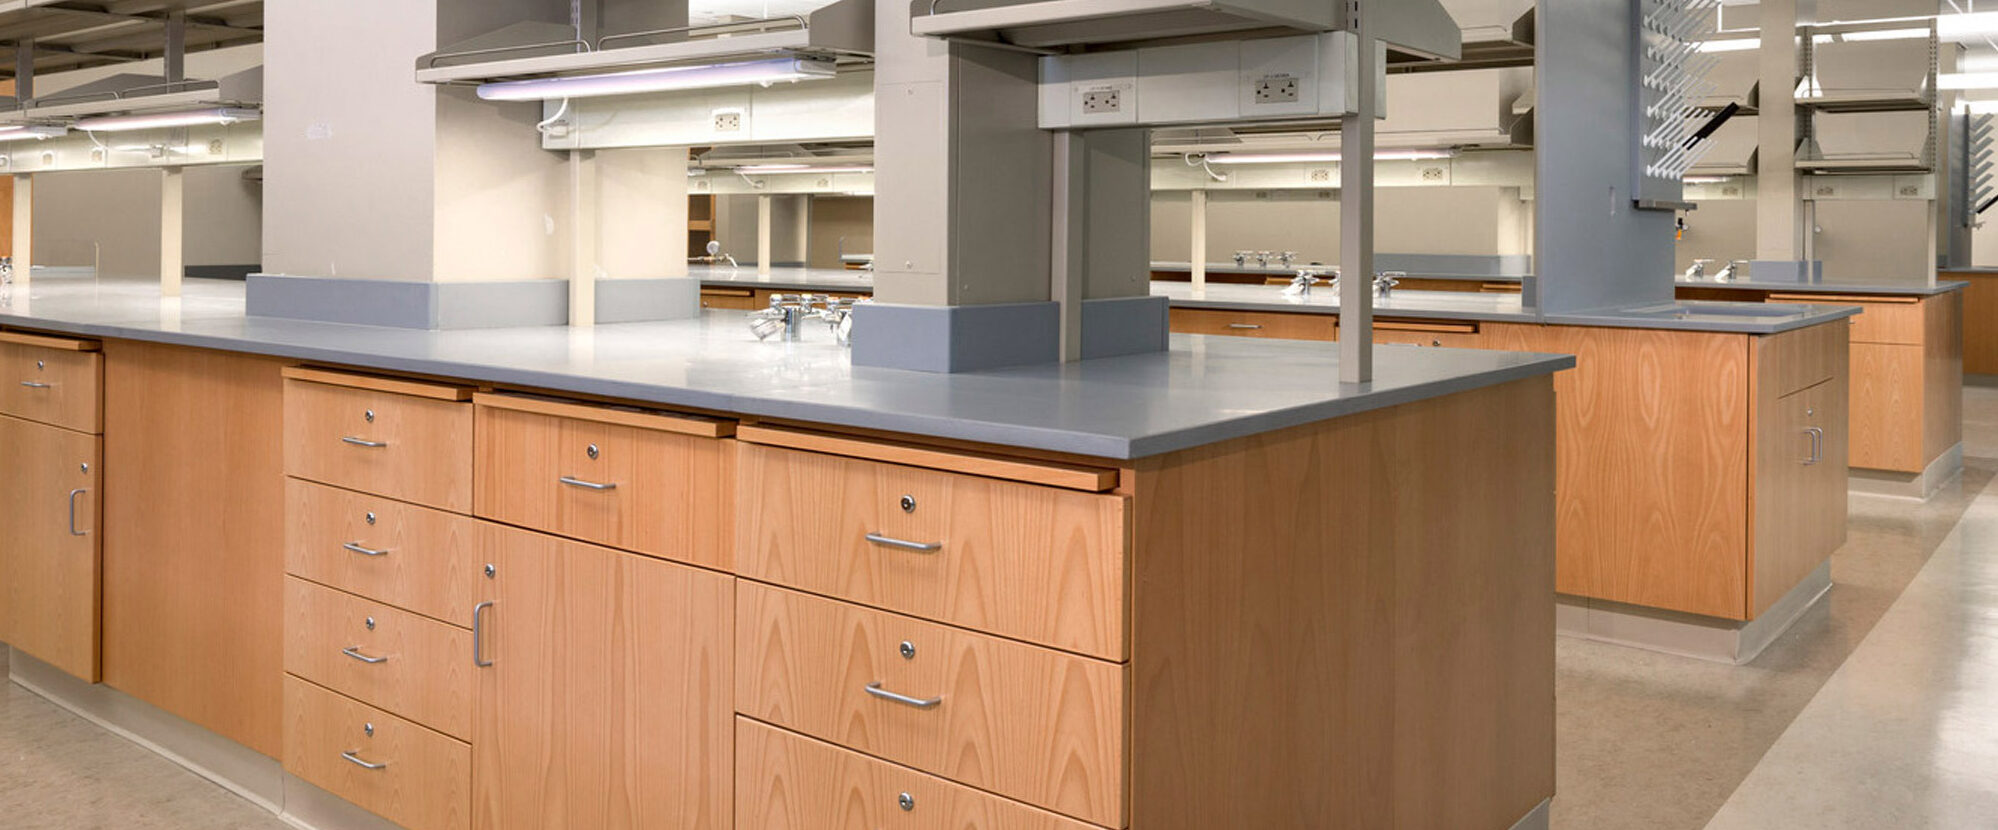 Modern laboratory interior featuring sleek wooden cabinetry with stainless steel handles, grey countertops, and overhead storage units. The space is accented by ample lighting and minimalistic design elements, providing a clean and professional atmosphere.